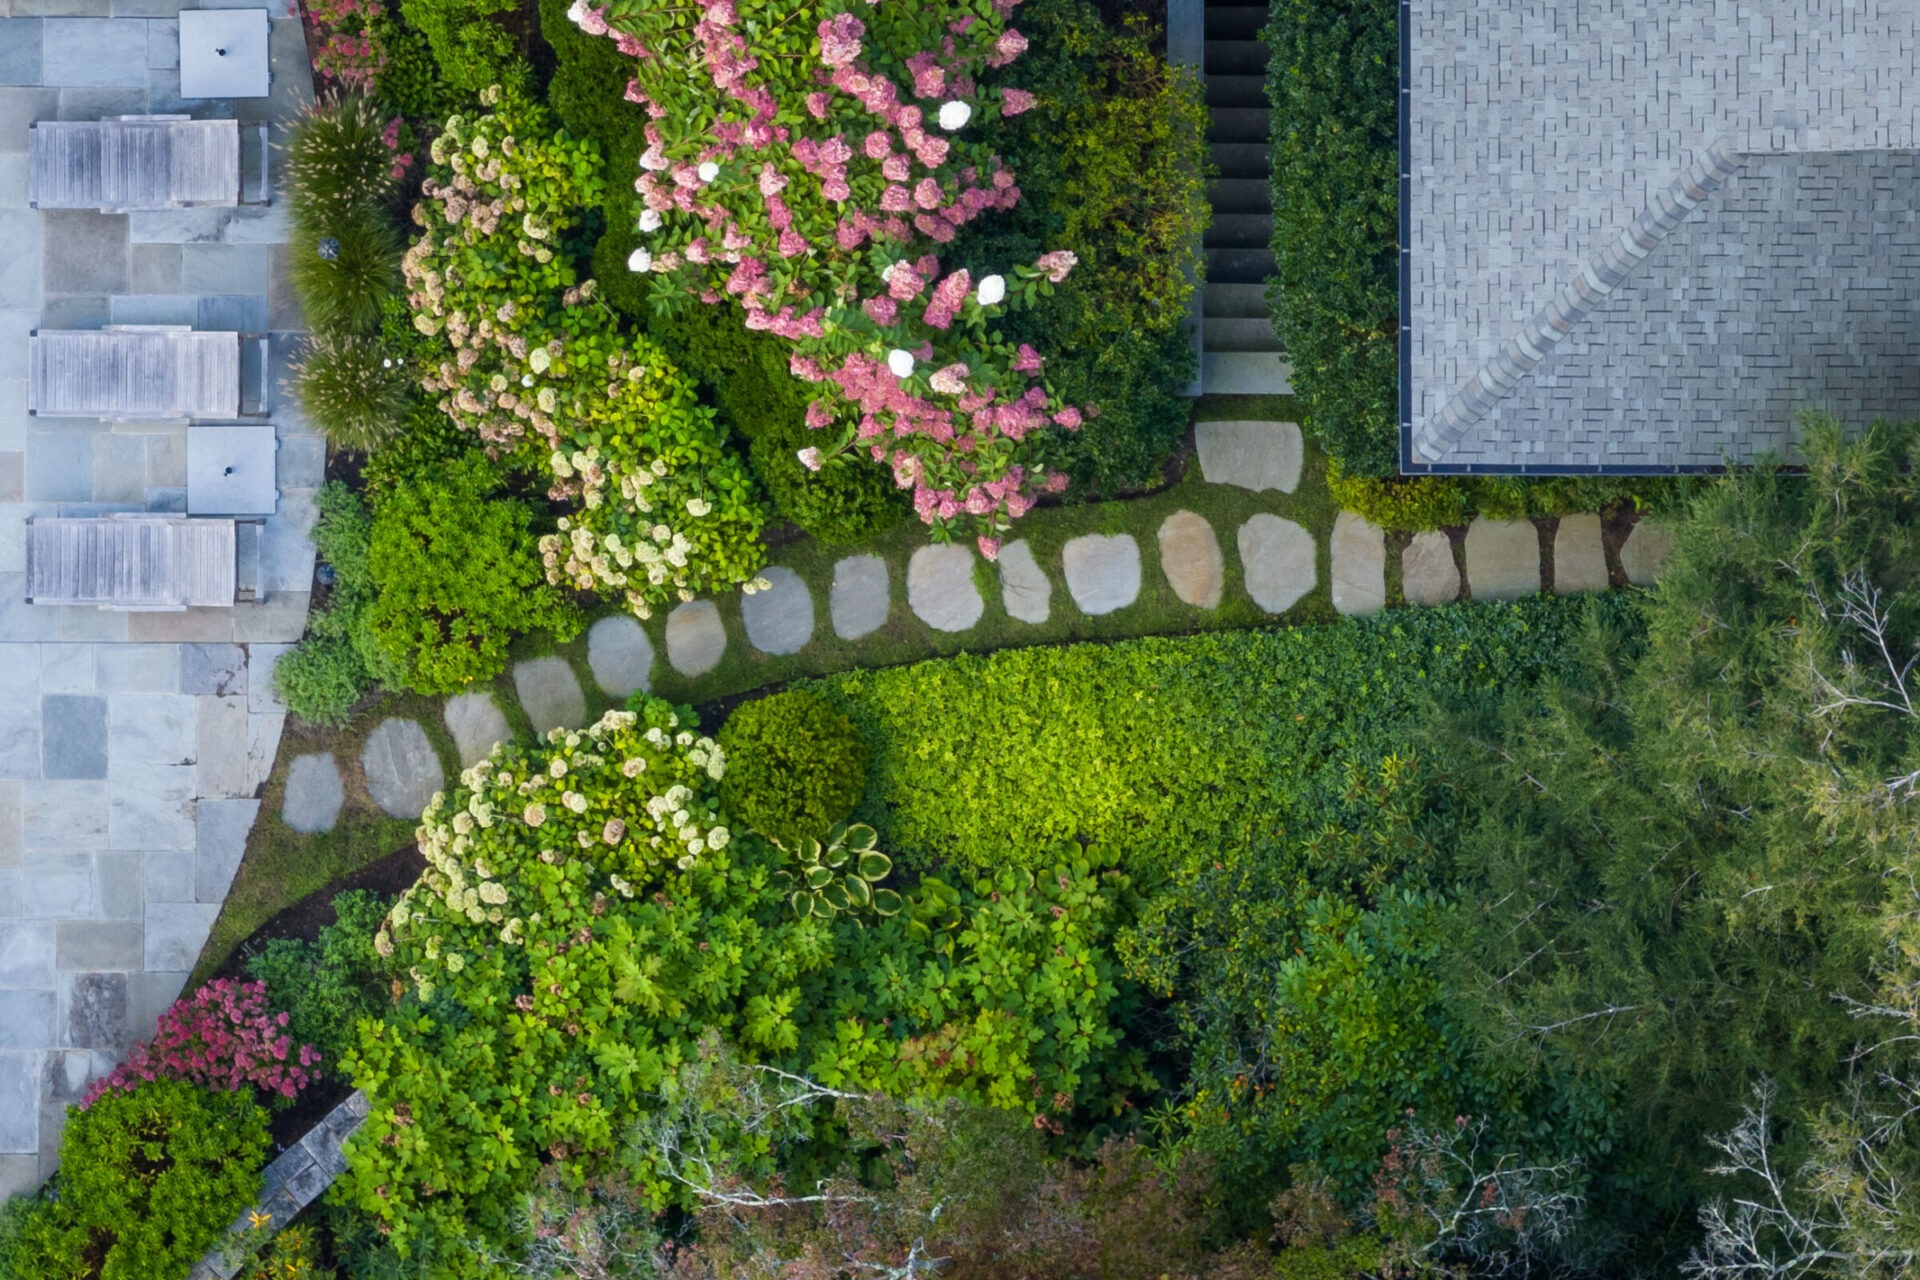 Aerial view of a landscaped garden with stepping stones, assorted plants, a staircase, and part of a building with a gray tile roof.